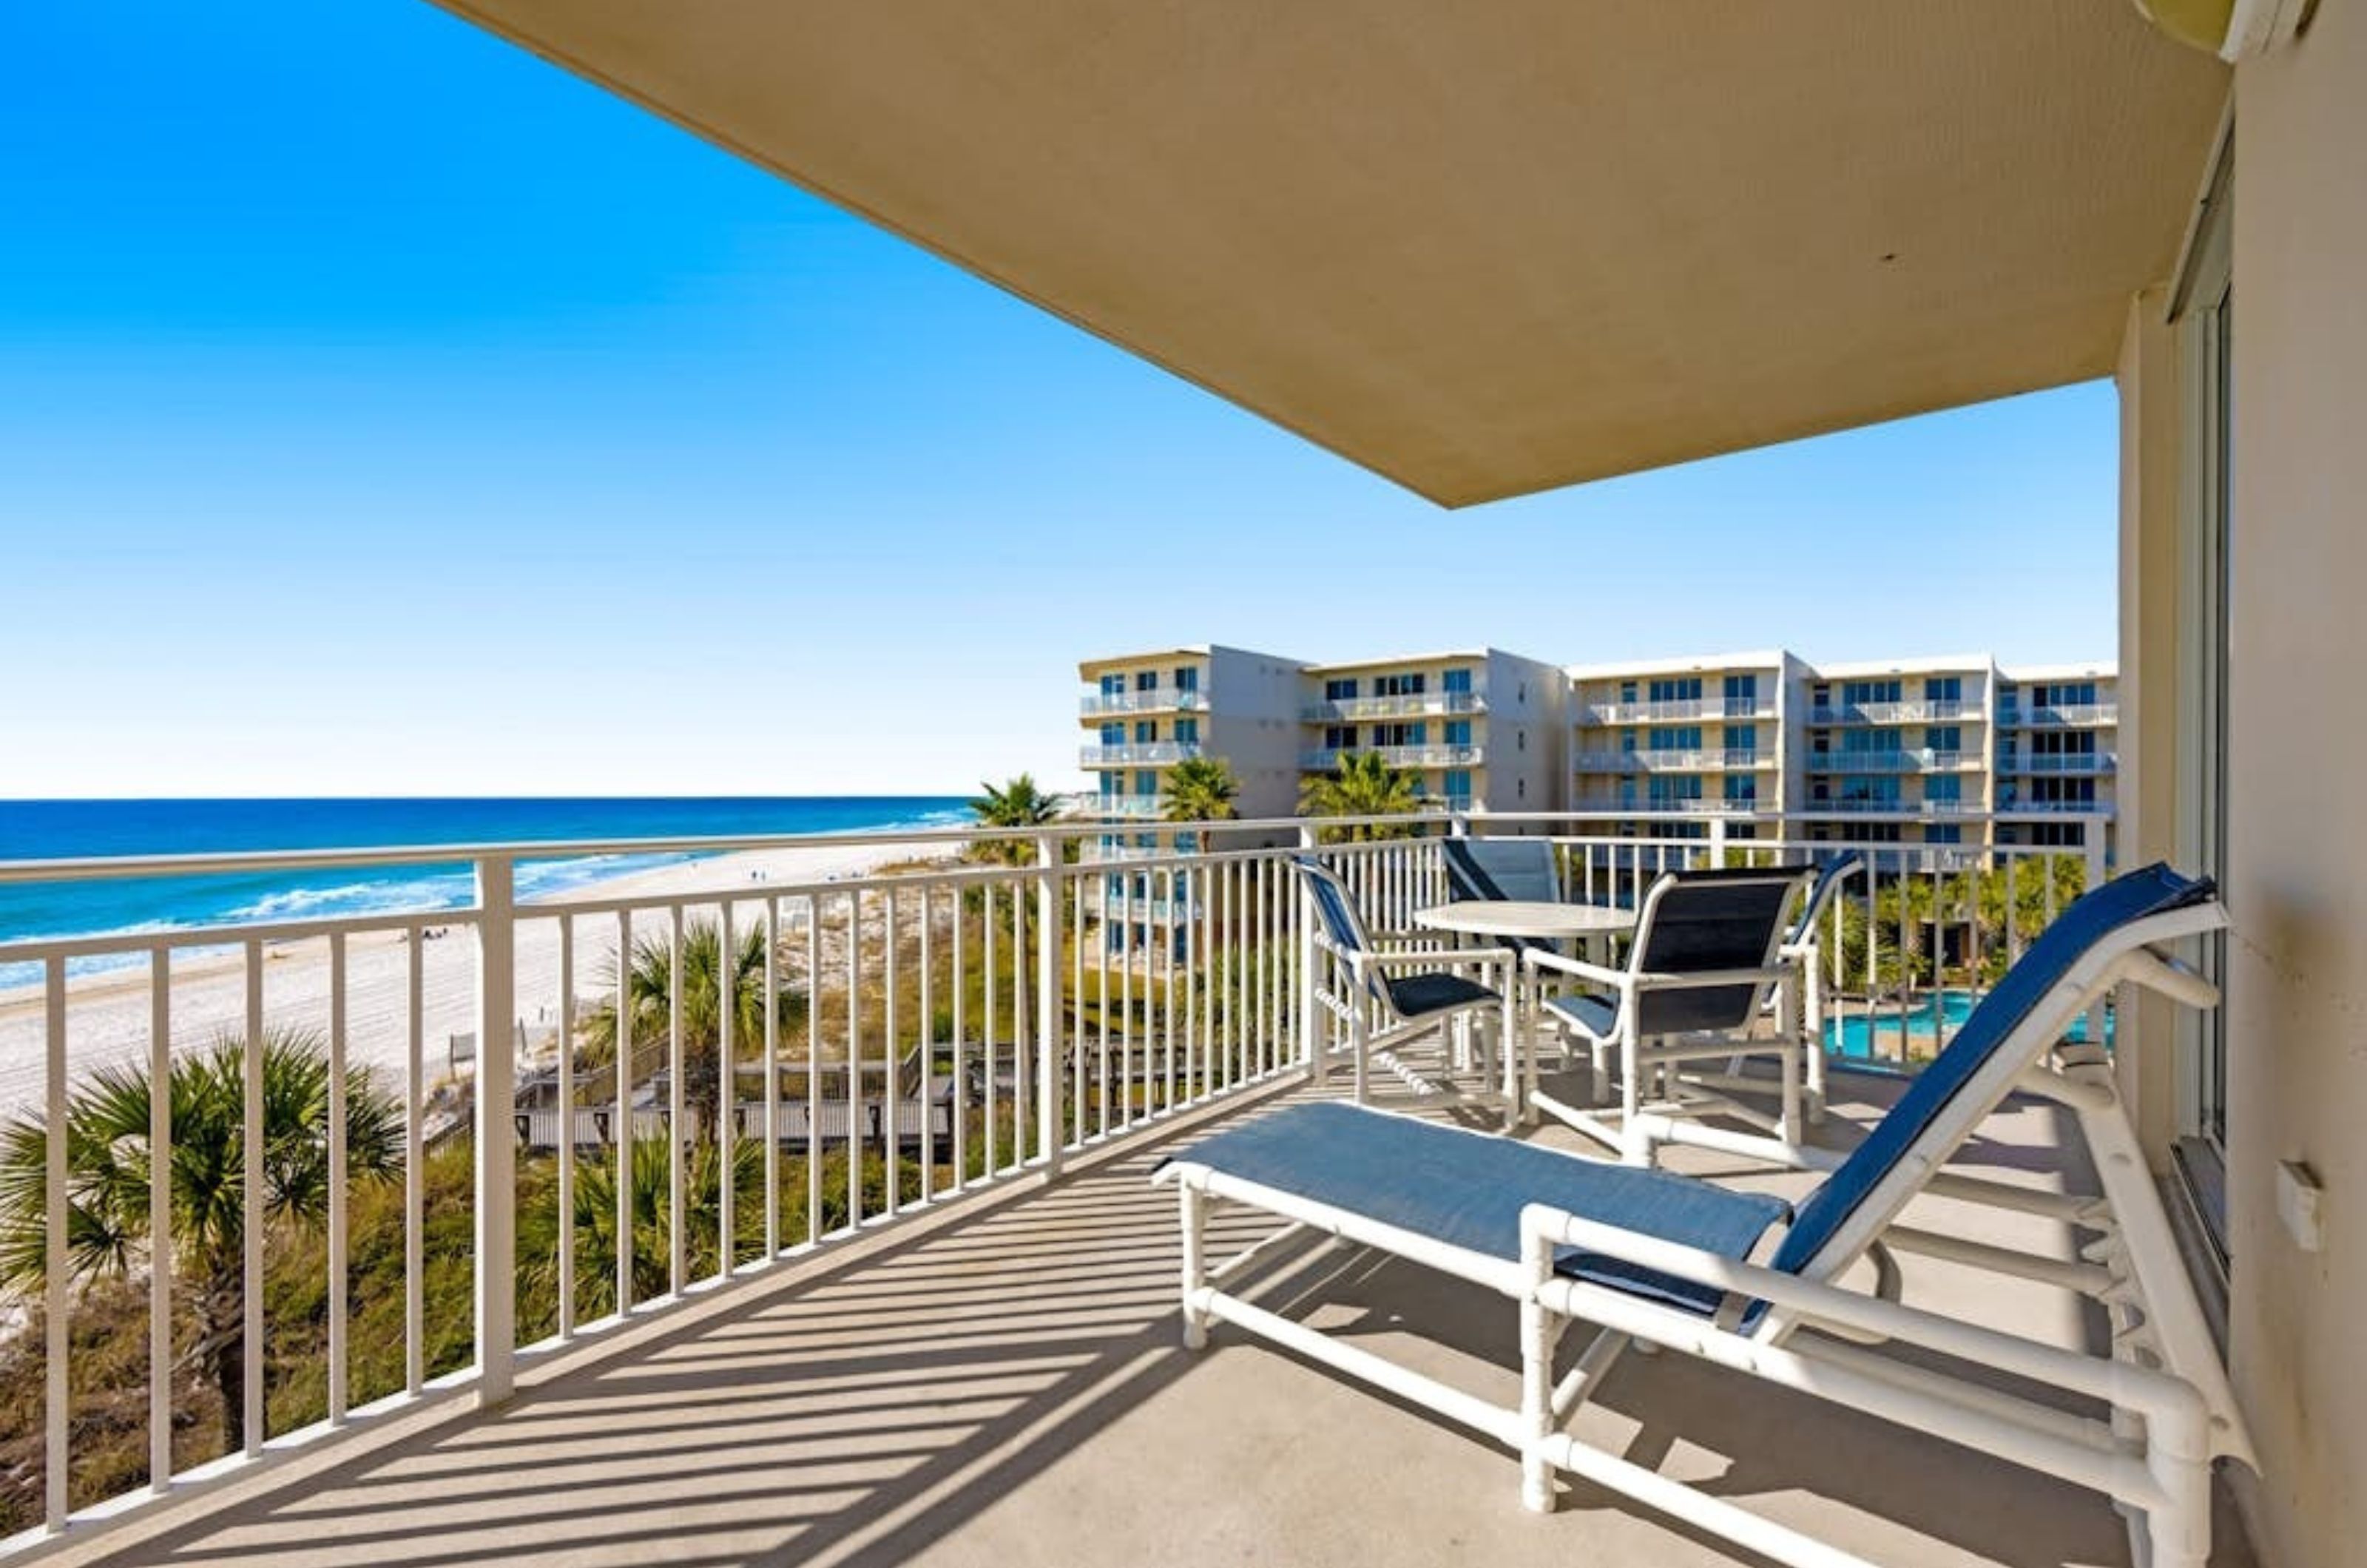 A lounge chair on a private balcony overlooking the Gulf at Waterscape in Fort Walton Beach Florida	